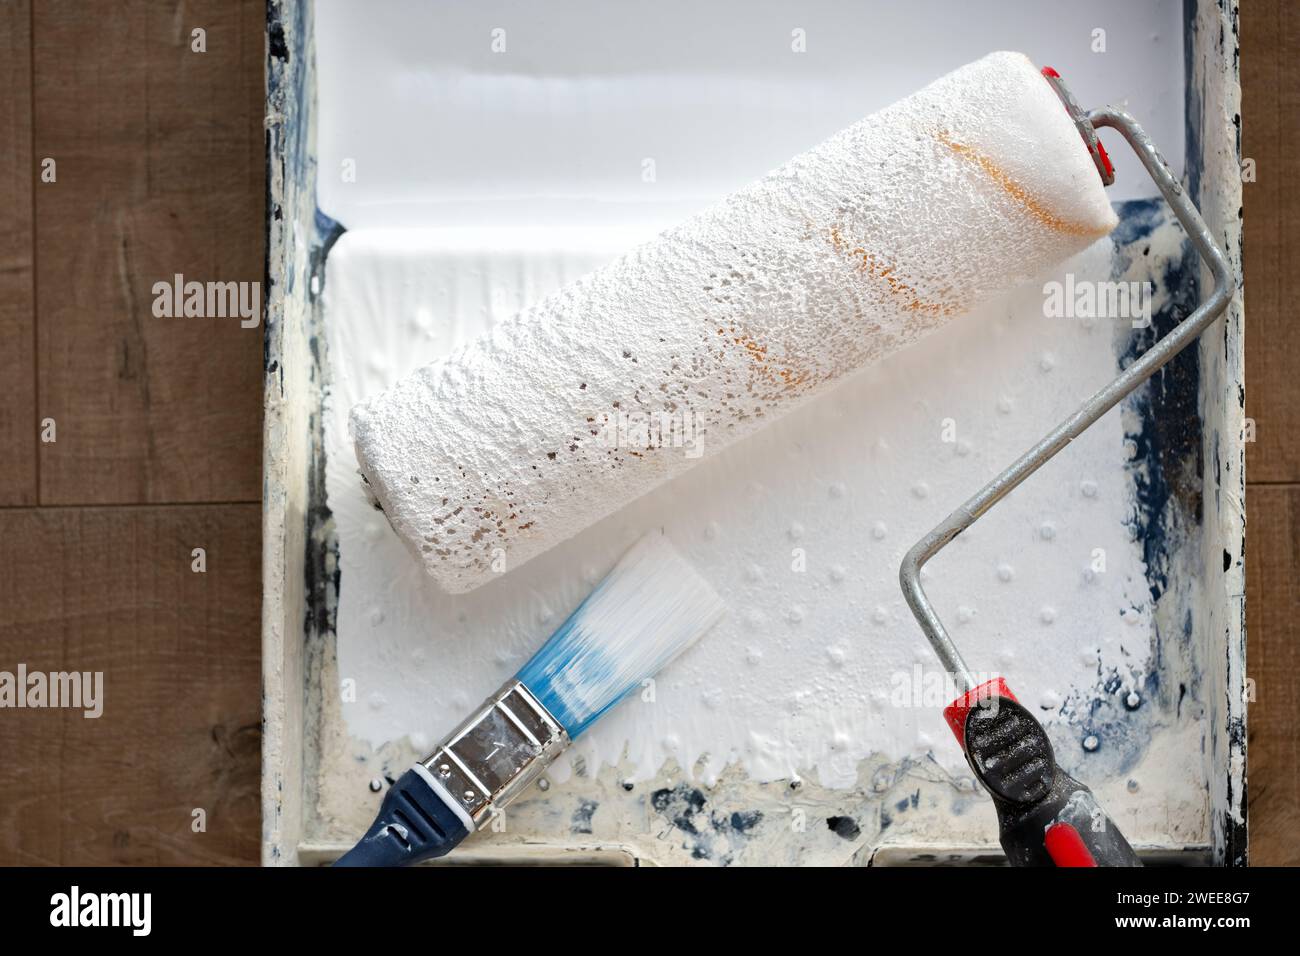 A decorators paint roller and paint brush lying in a paint tray filled with white emulsion paint for covering walls and ceilings with a fresh coat Stock Photo